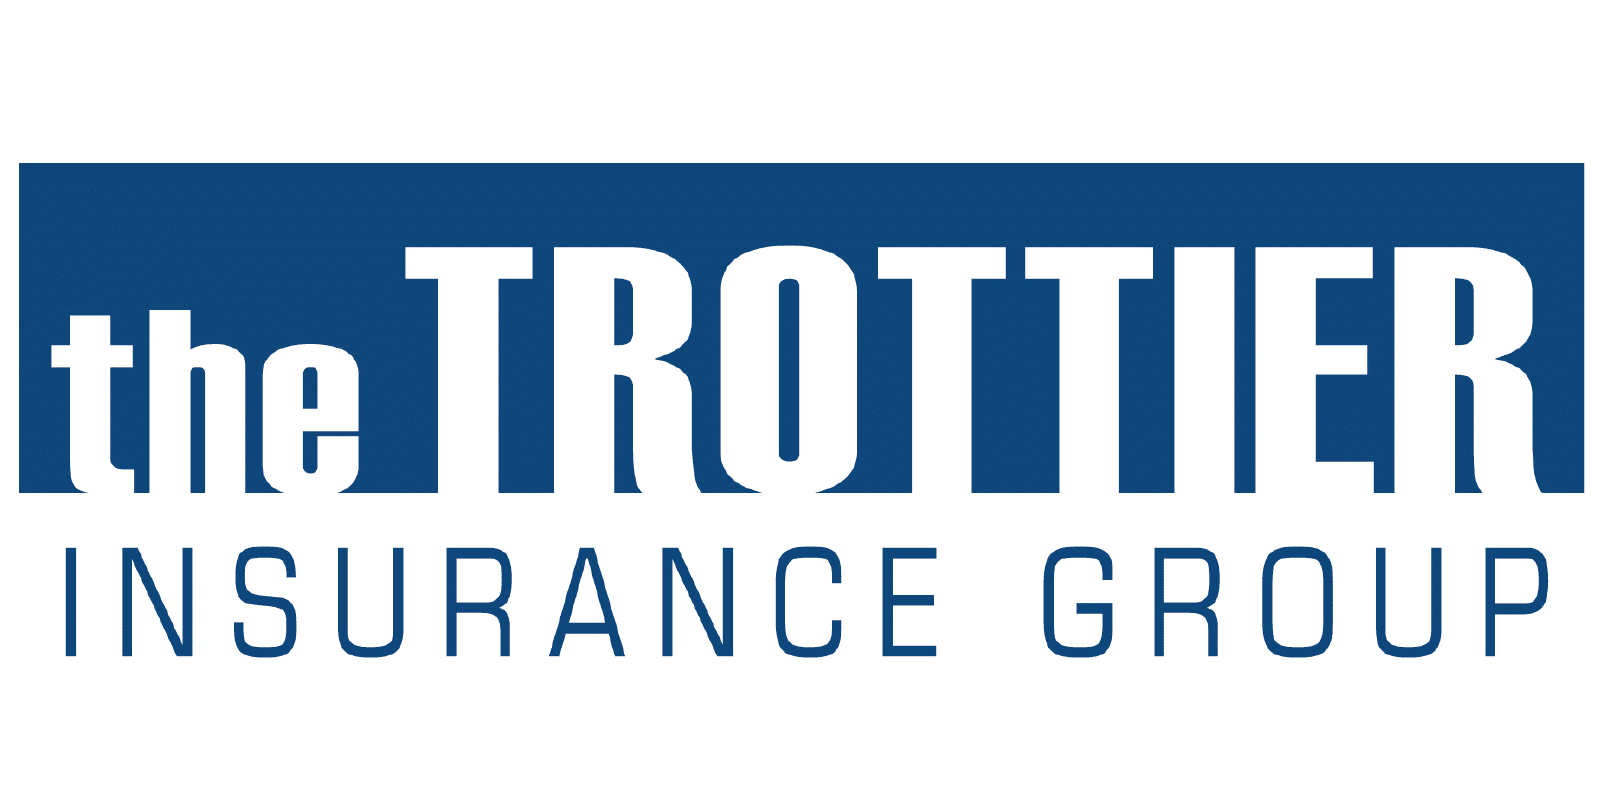 page 1 club, the gratzi, trottier insurance group